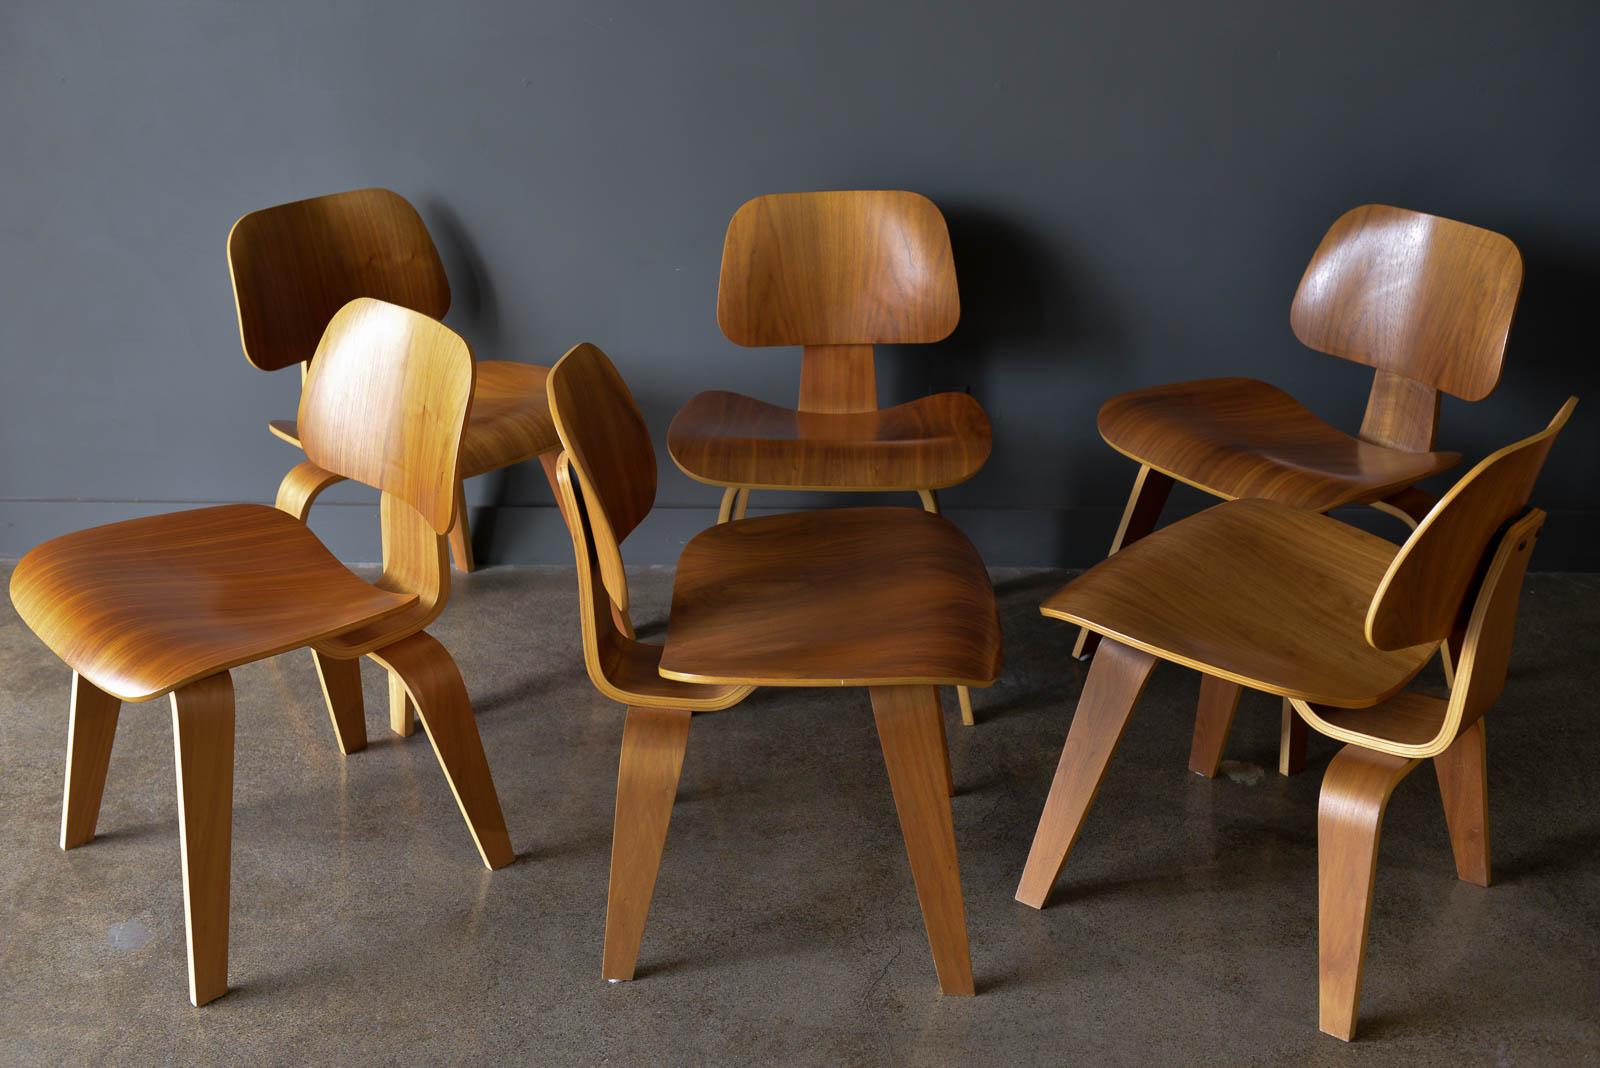 Set of 6 authentic walnut eames for Herman Miller DCW Chairs. Beautiful matching set of walnut Charles and Ray Eames DCW (dining chair wood) dining chairs. Excellent original condition with only slight wear, no major scratches. Shock mounts are in